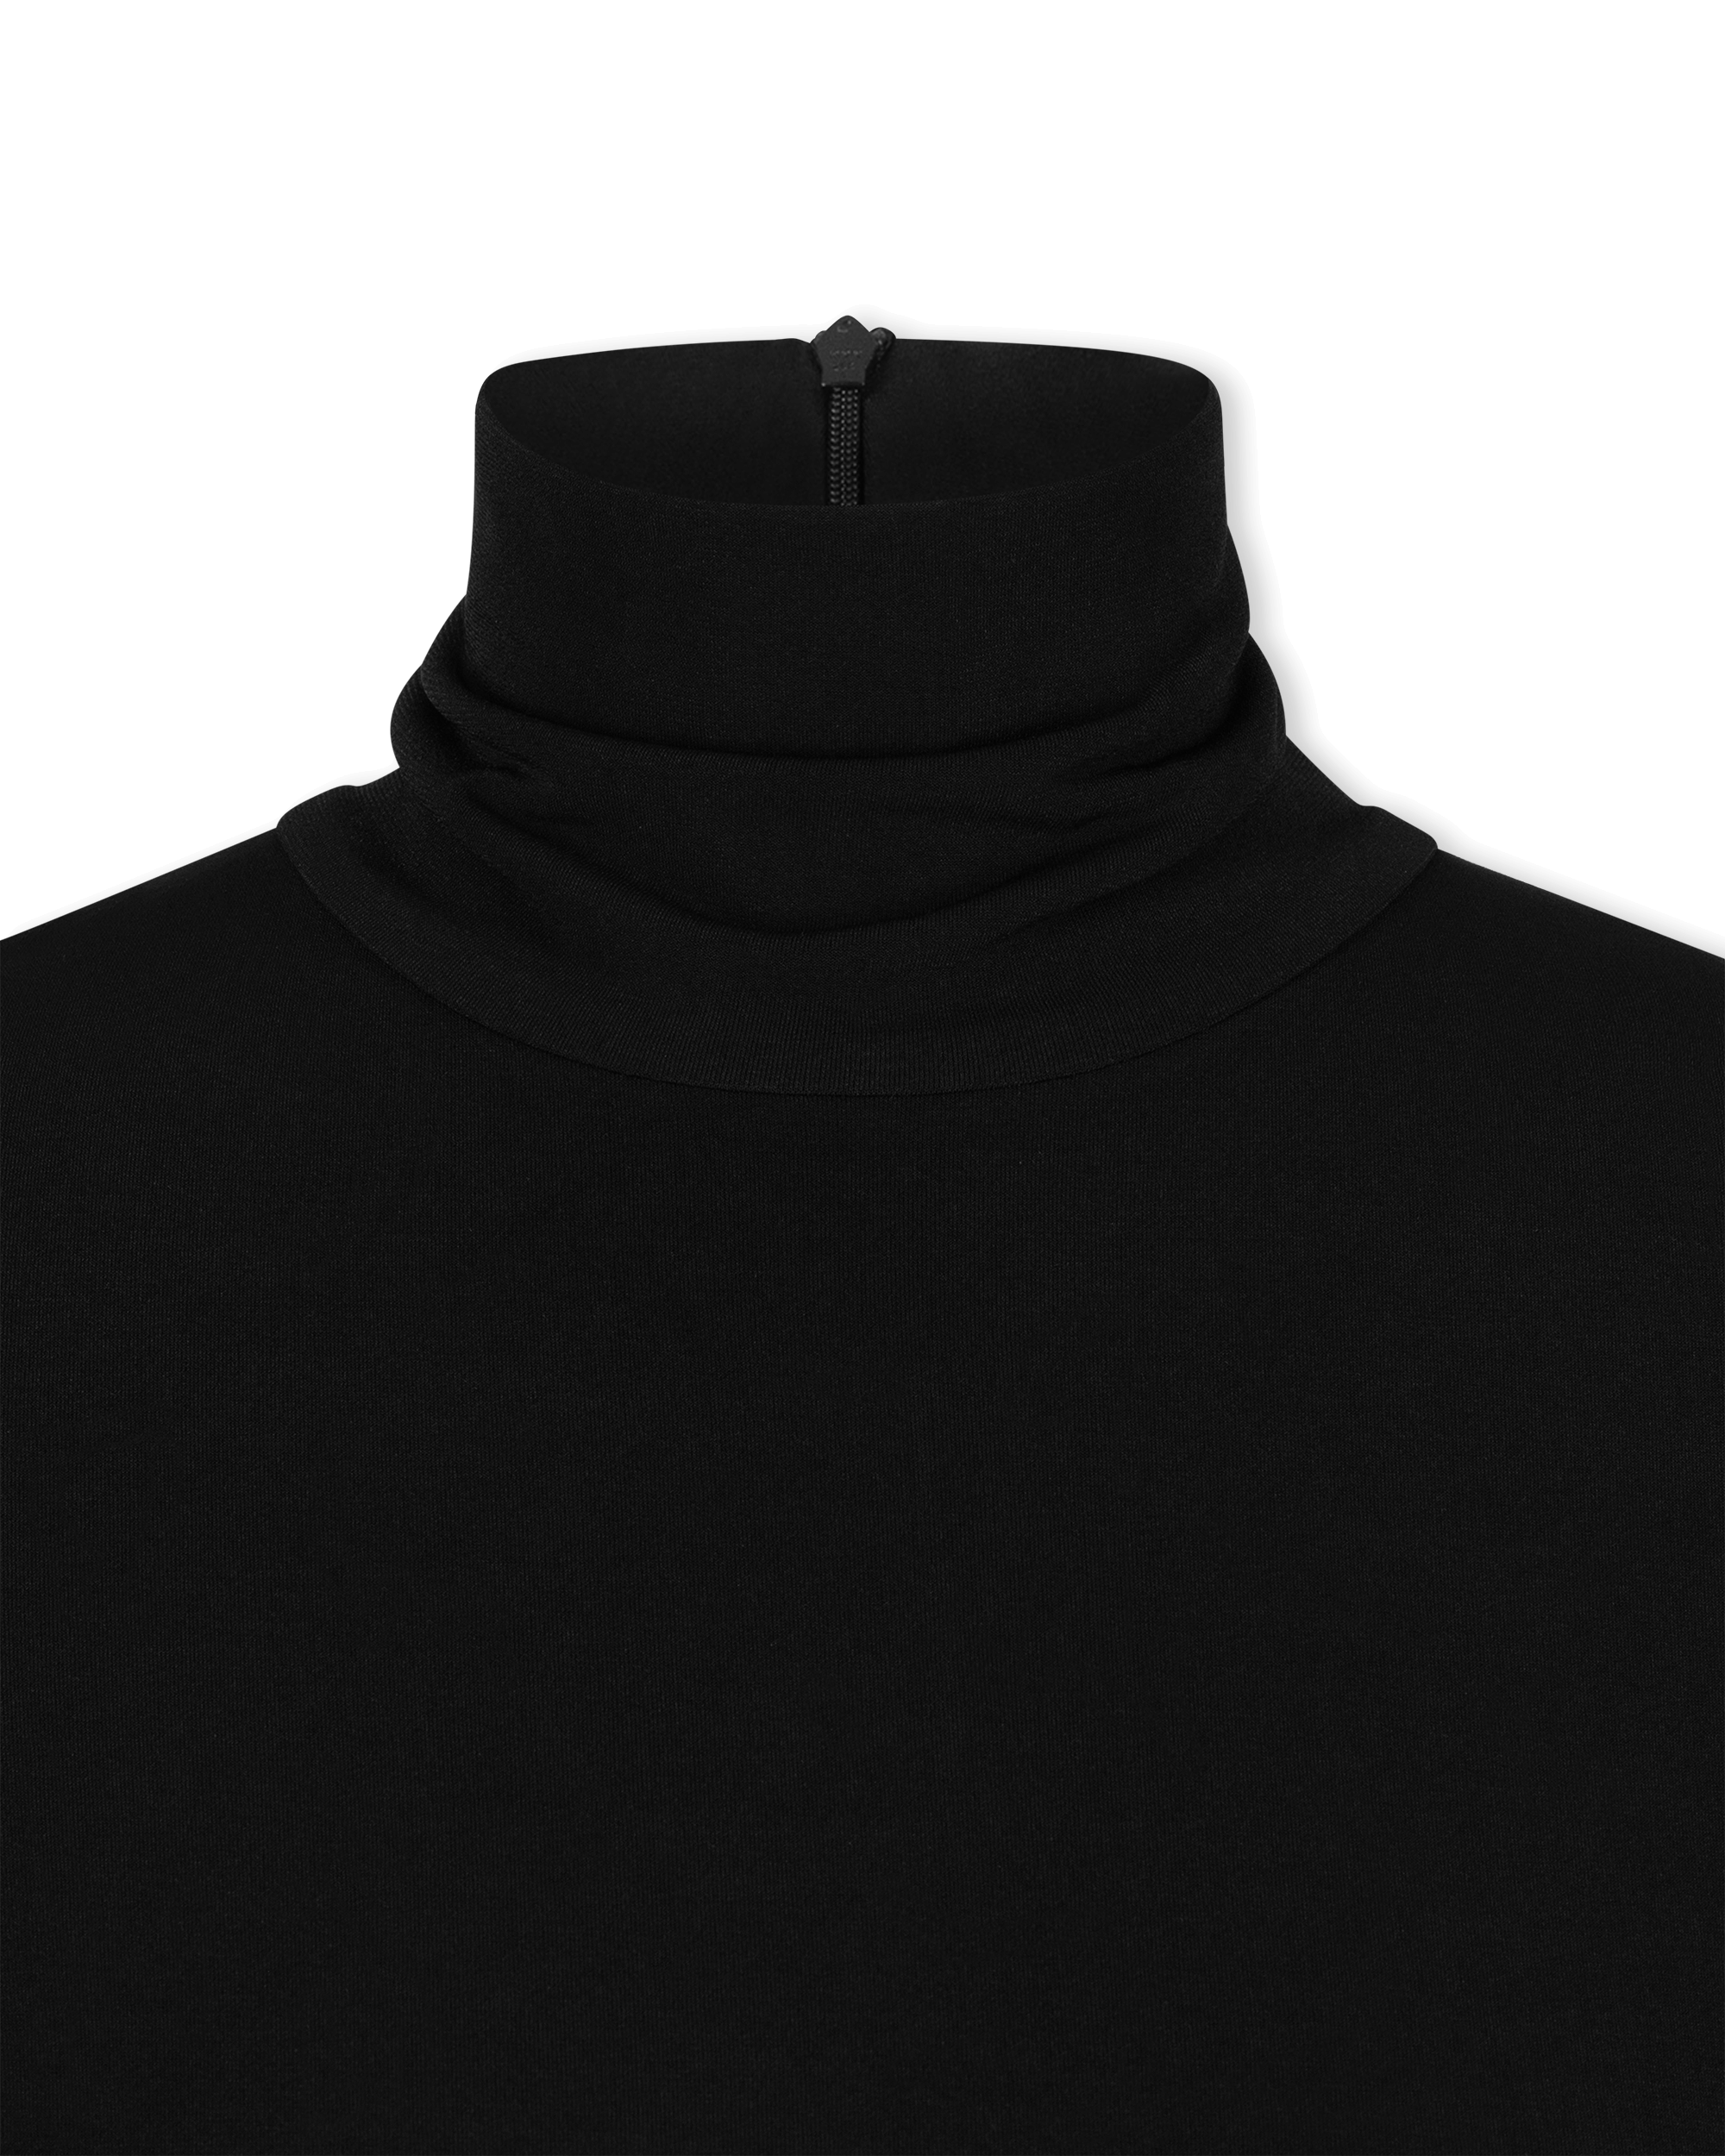 Half Sleeve Fitted Turtleneck Top